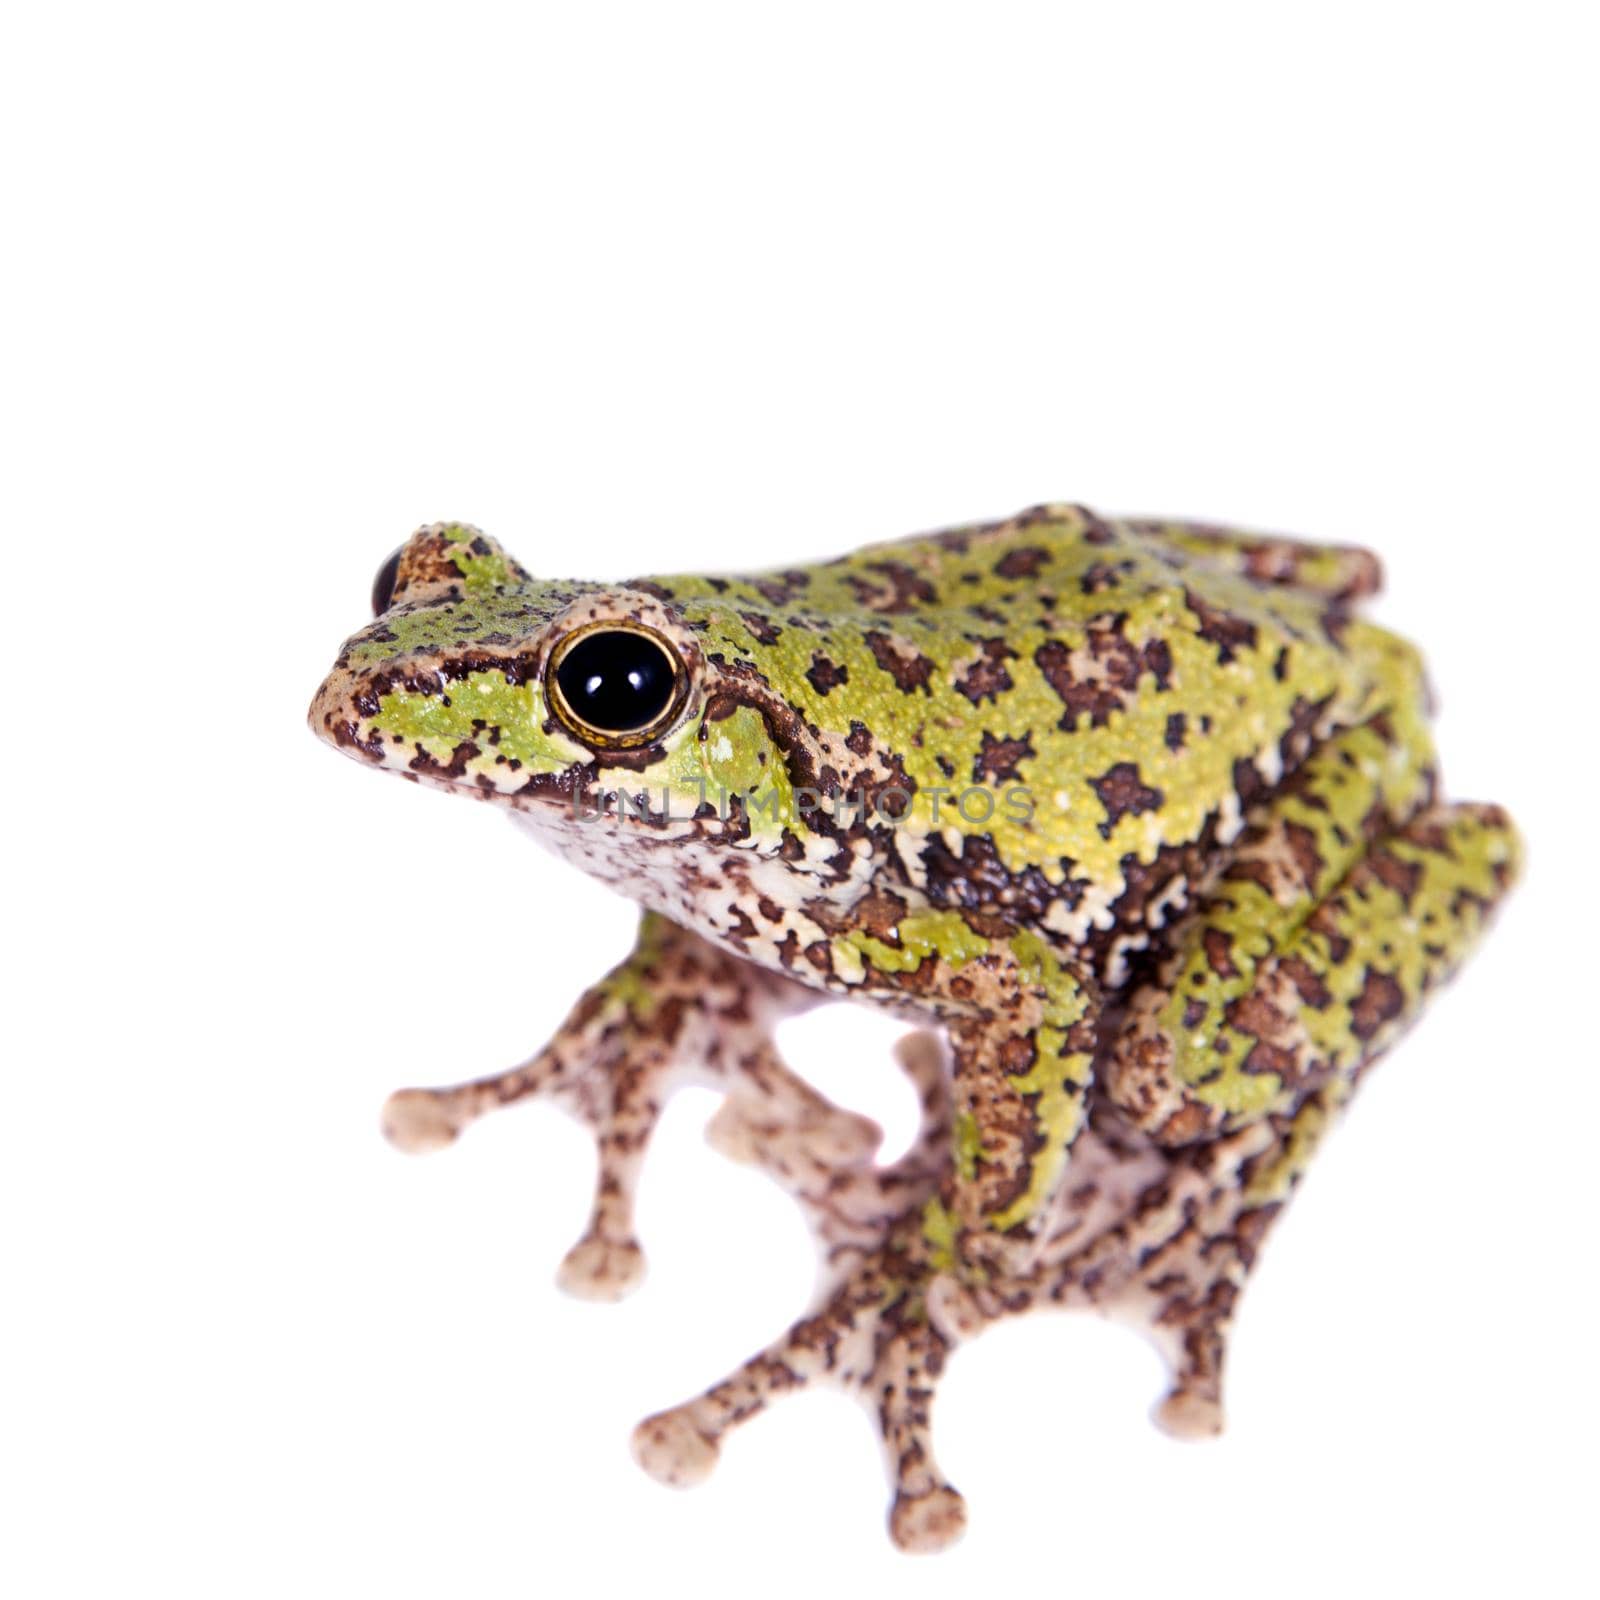 Polypedates duboisi, rare species of frog isolated on white background